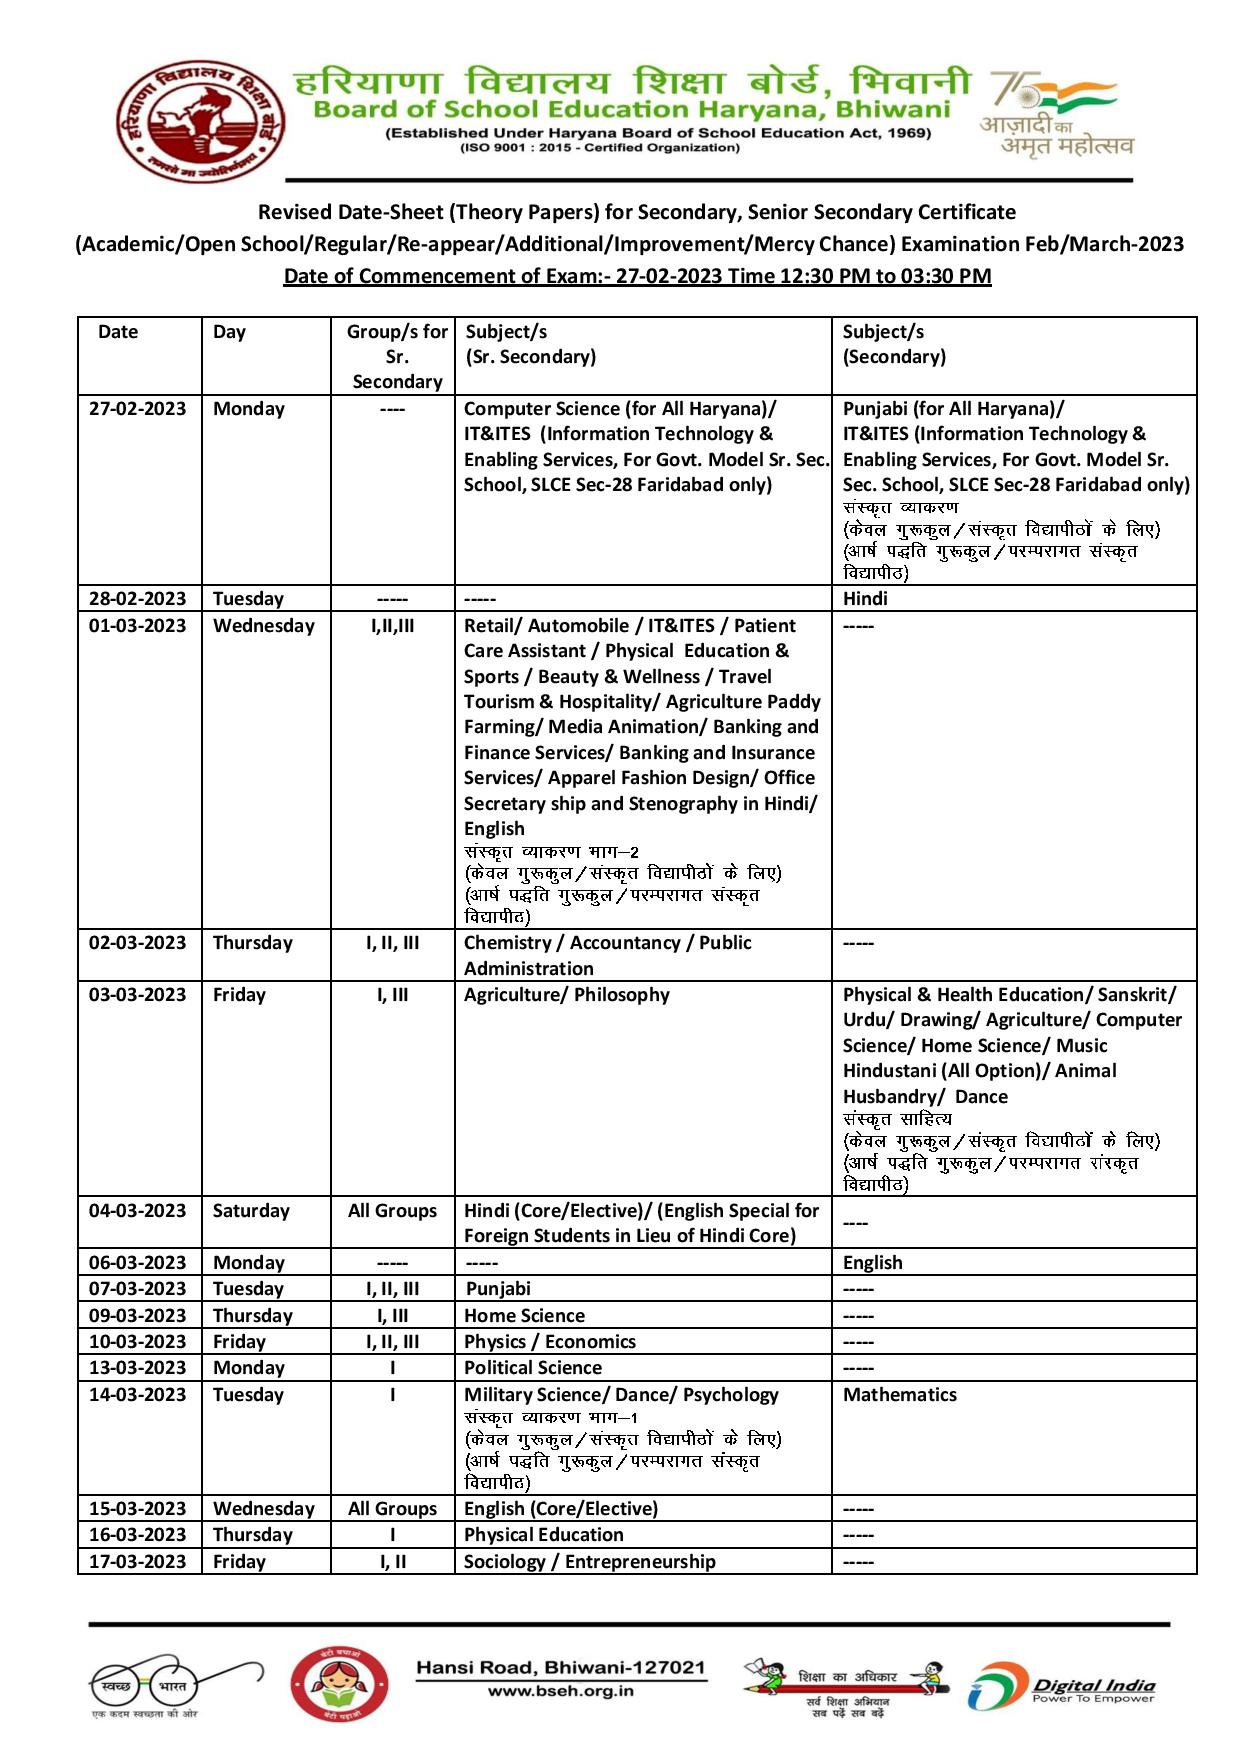 HBSE 10th & 12th Date Sheet 2023